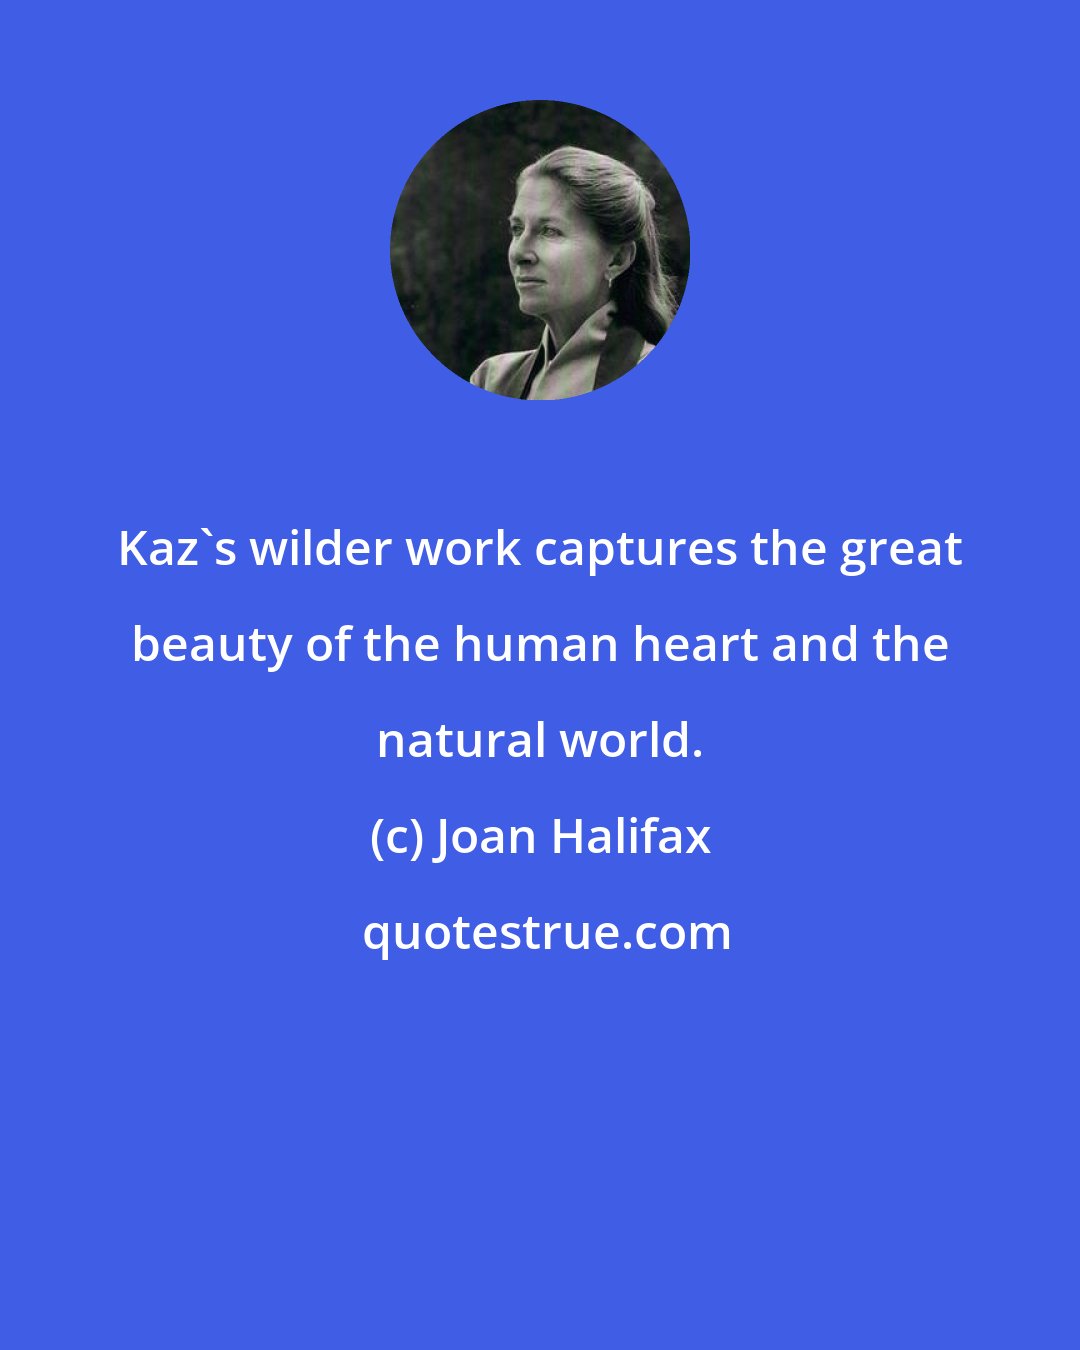 Joan Halifax: Kaz's wilder work captures the great beauty of the human heart and the natural world.